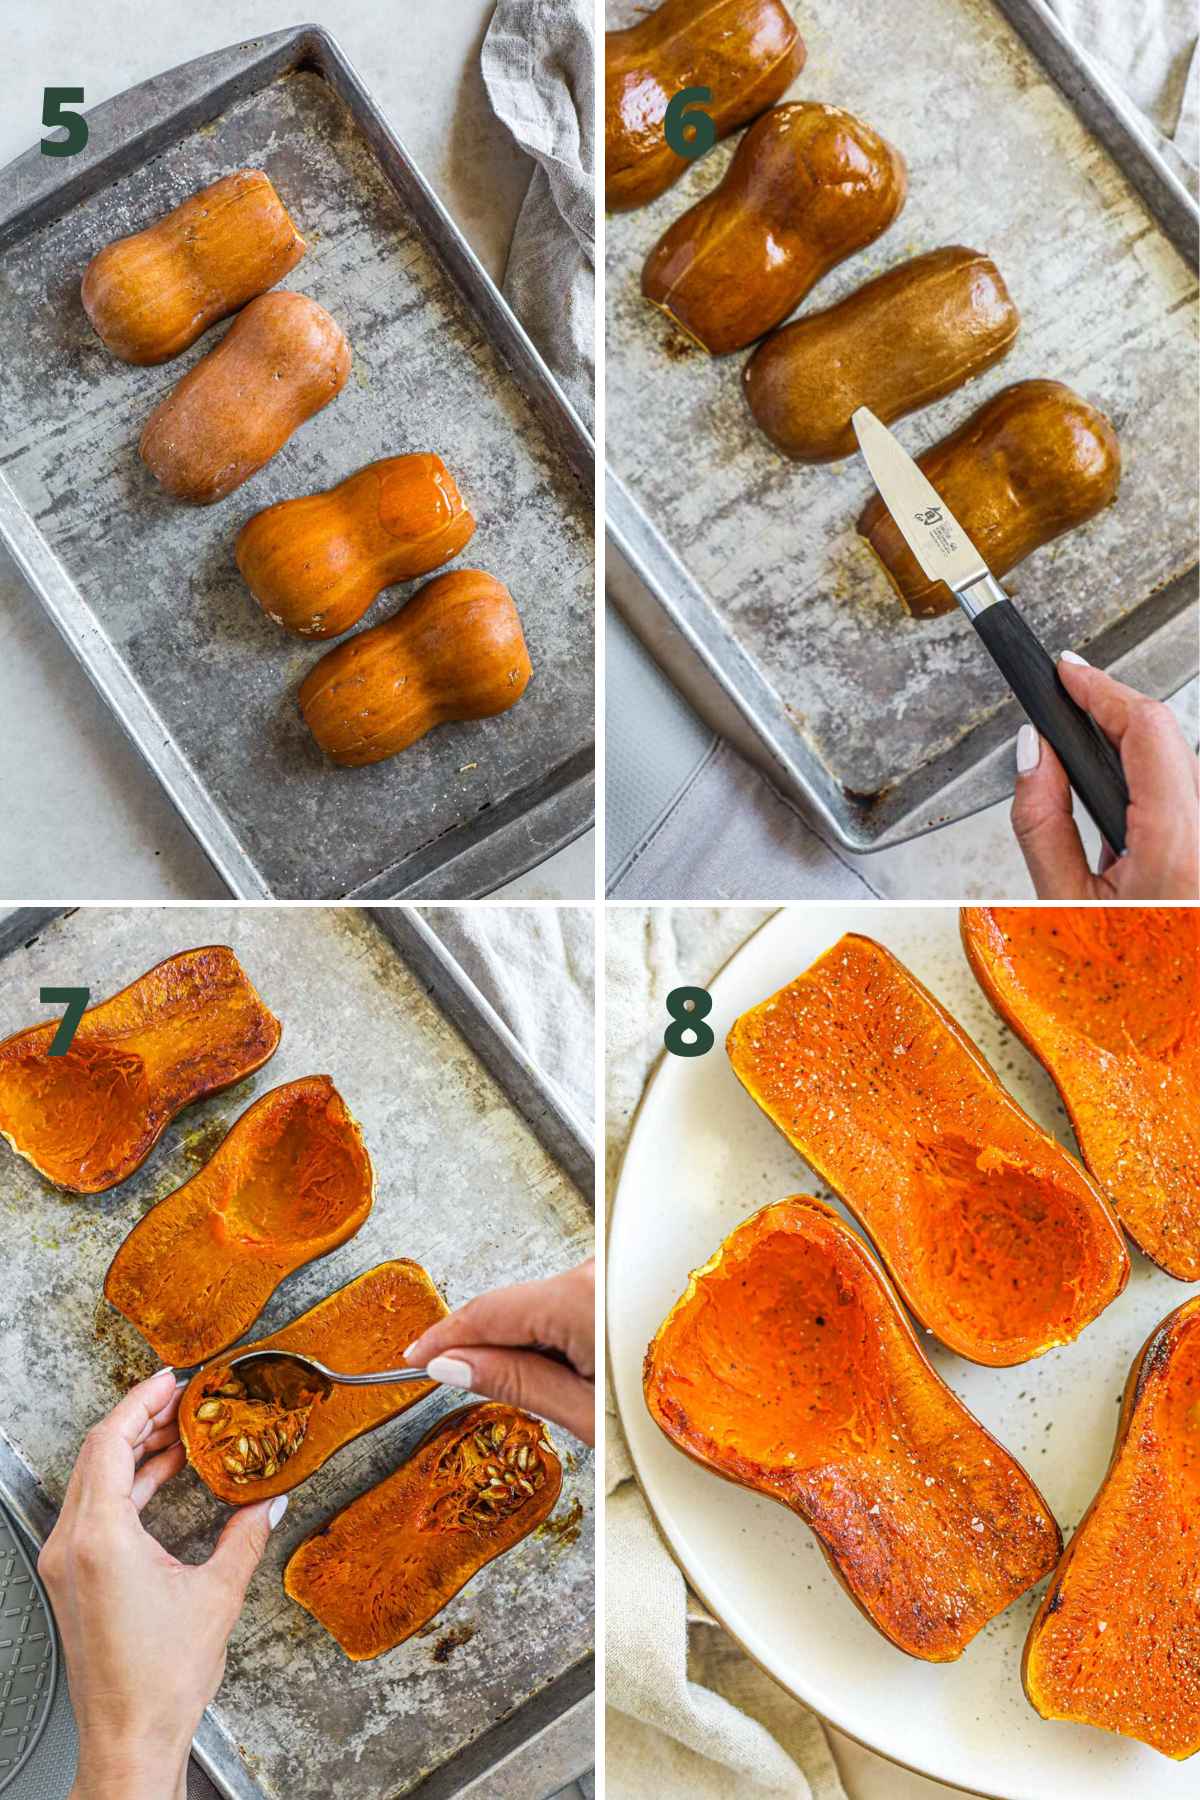 Steps to make roasted squash, including turning the squash over flesh side down, roasting in the oven, removing the seeds, and seasoning with salt and pepper.